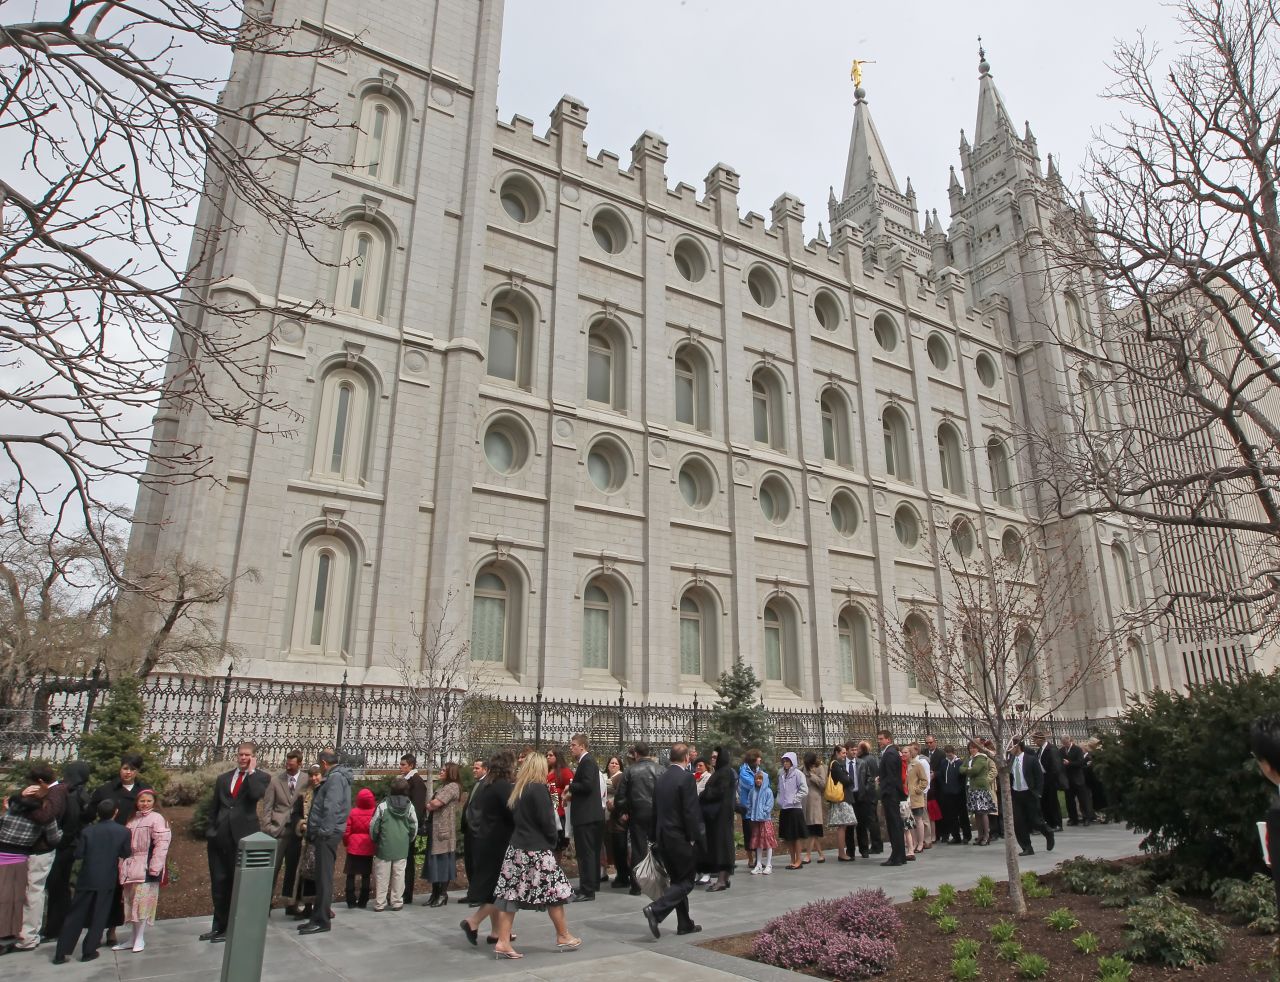 437,160: The number of youth members in units chartered by The Church of Jesus Christ of Latter-day Saints, the most of any faith-based organization. As of 2013, the United Methodist Church had the second-strongest membership, followed by the Catholic Church.